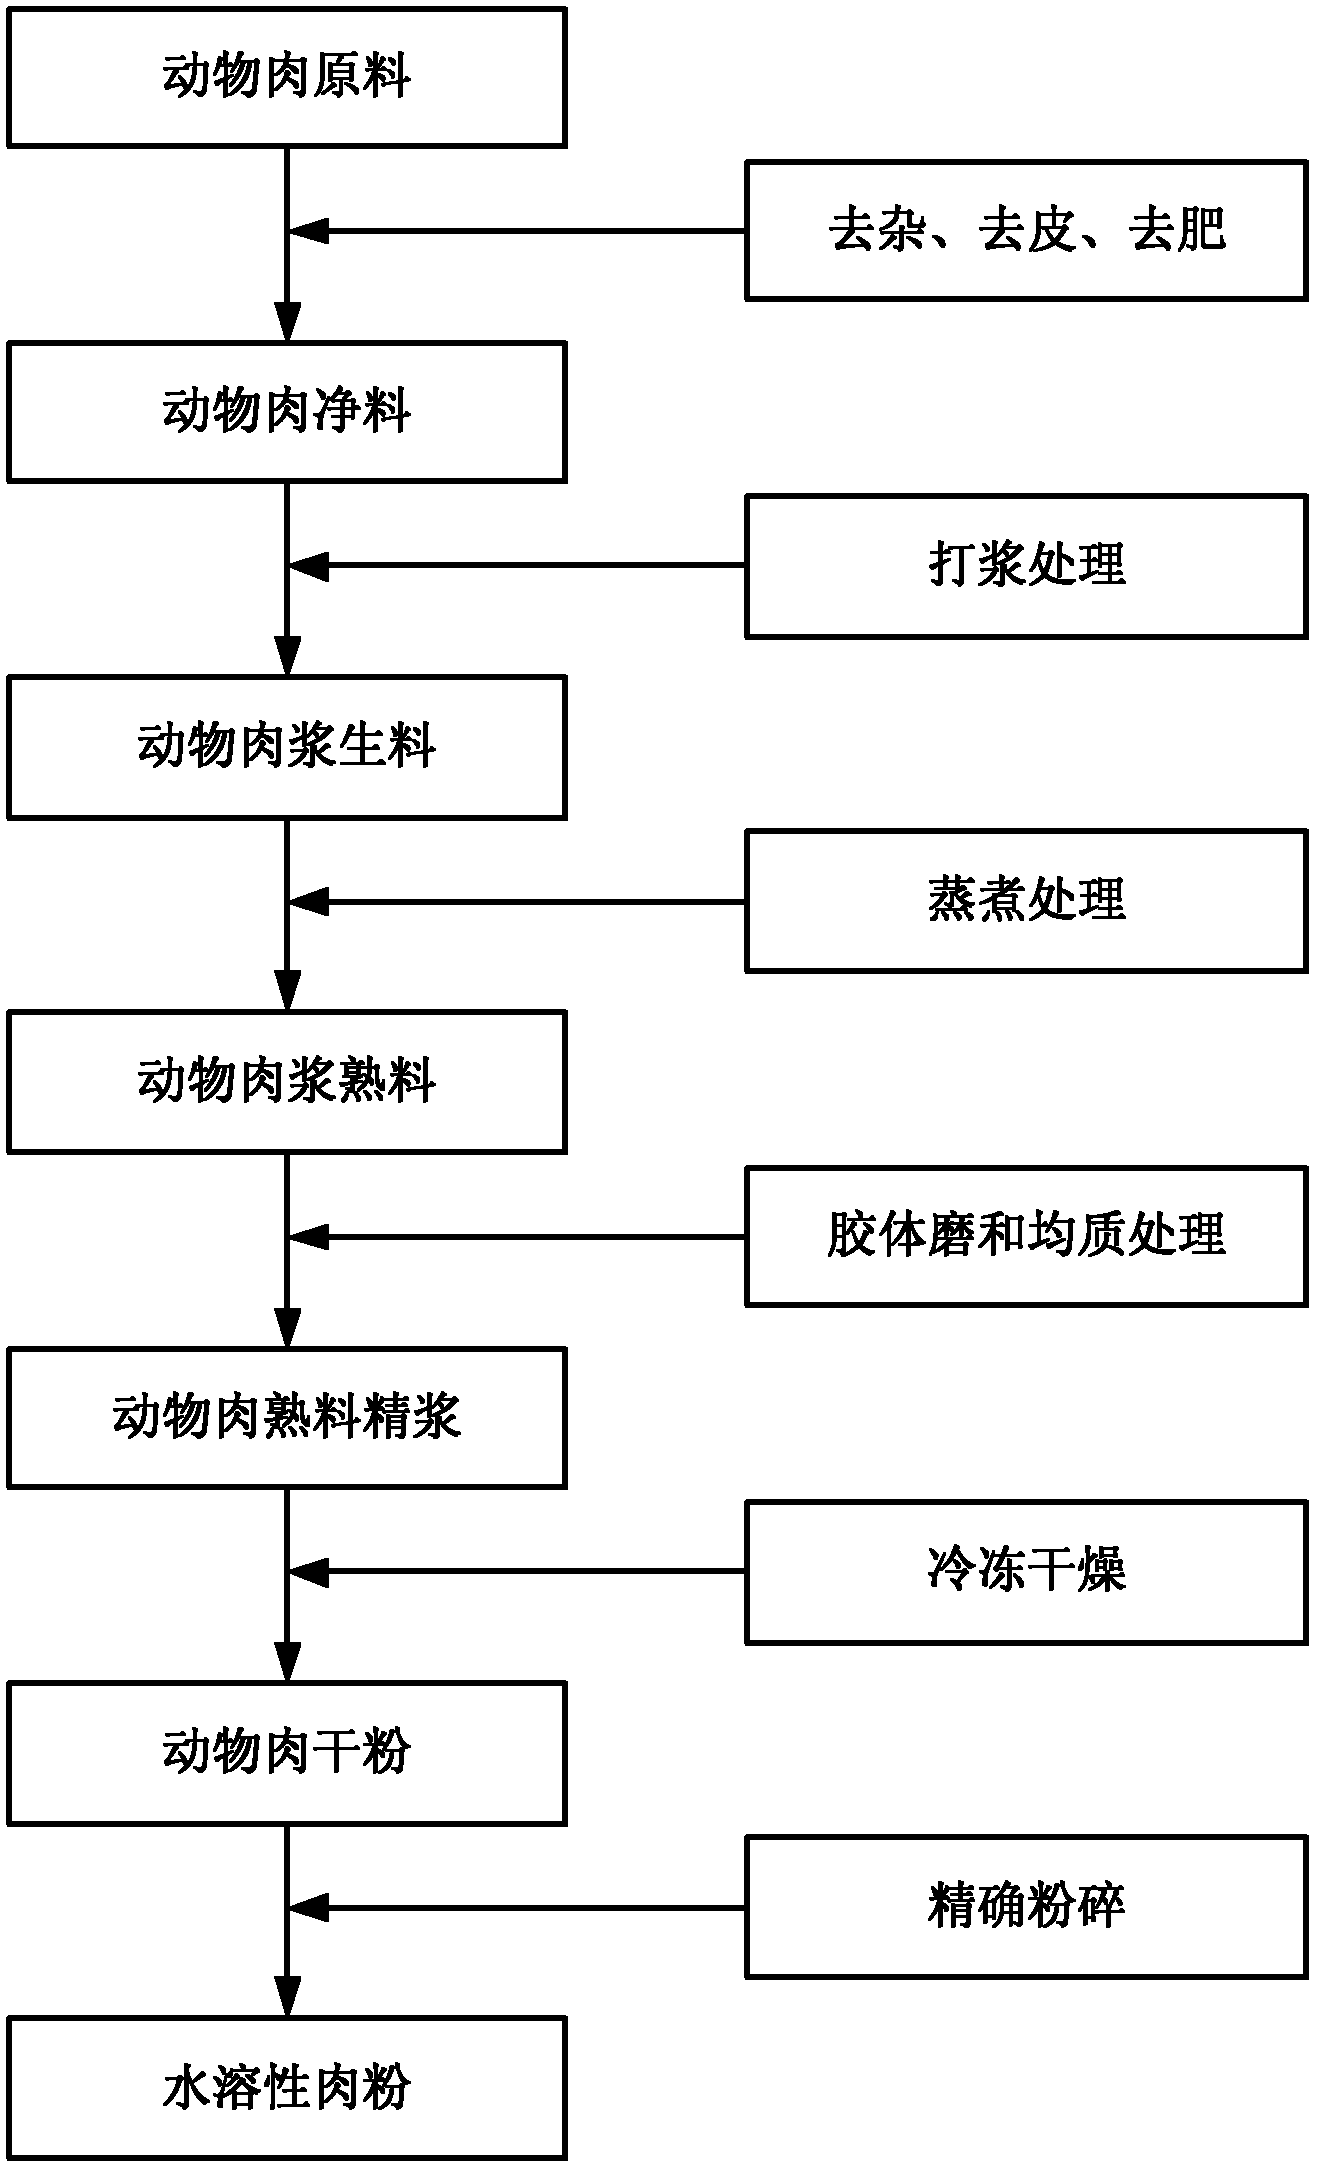 Process for preparing water-soluble meat powder